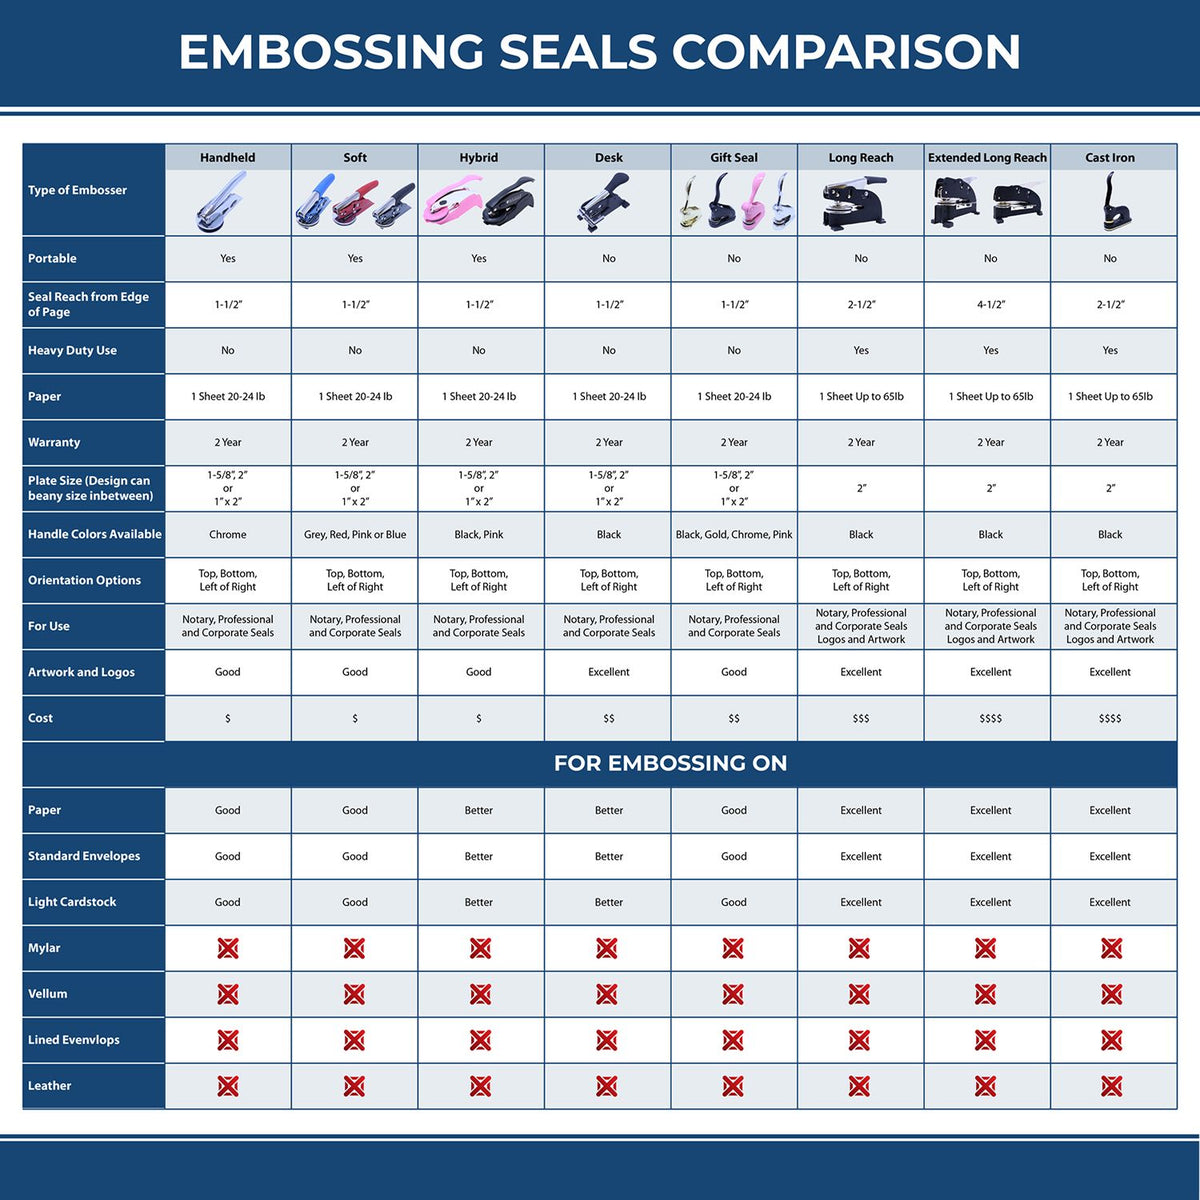 A comparison chart for the different types of mount models available for the Long Reach Georgia PE Seal.